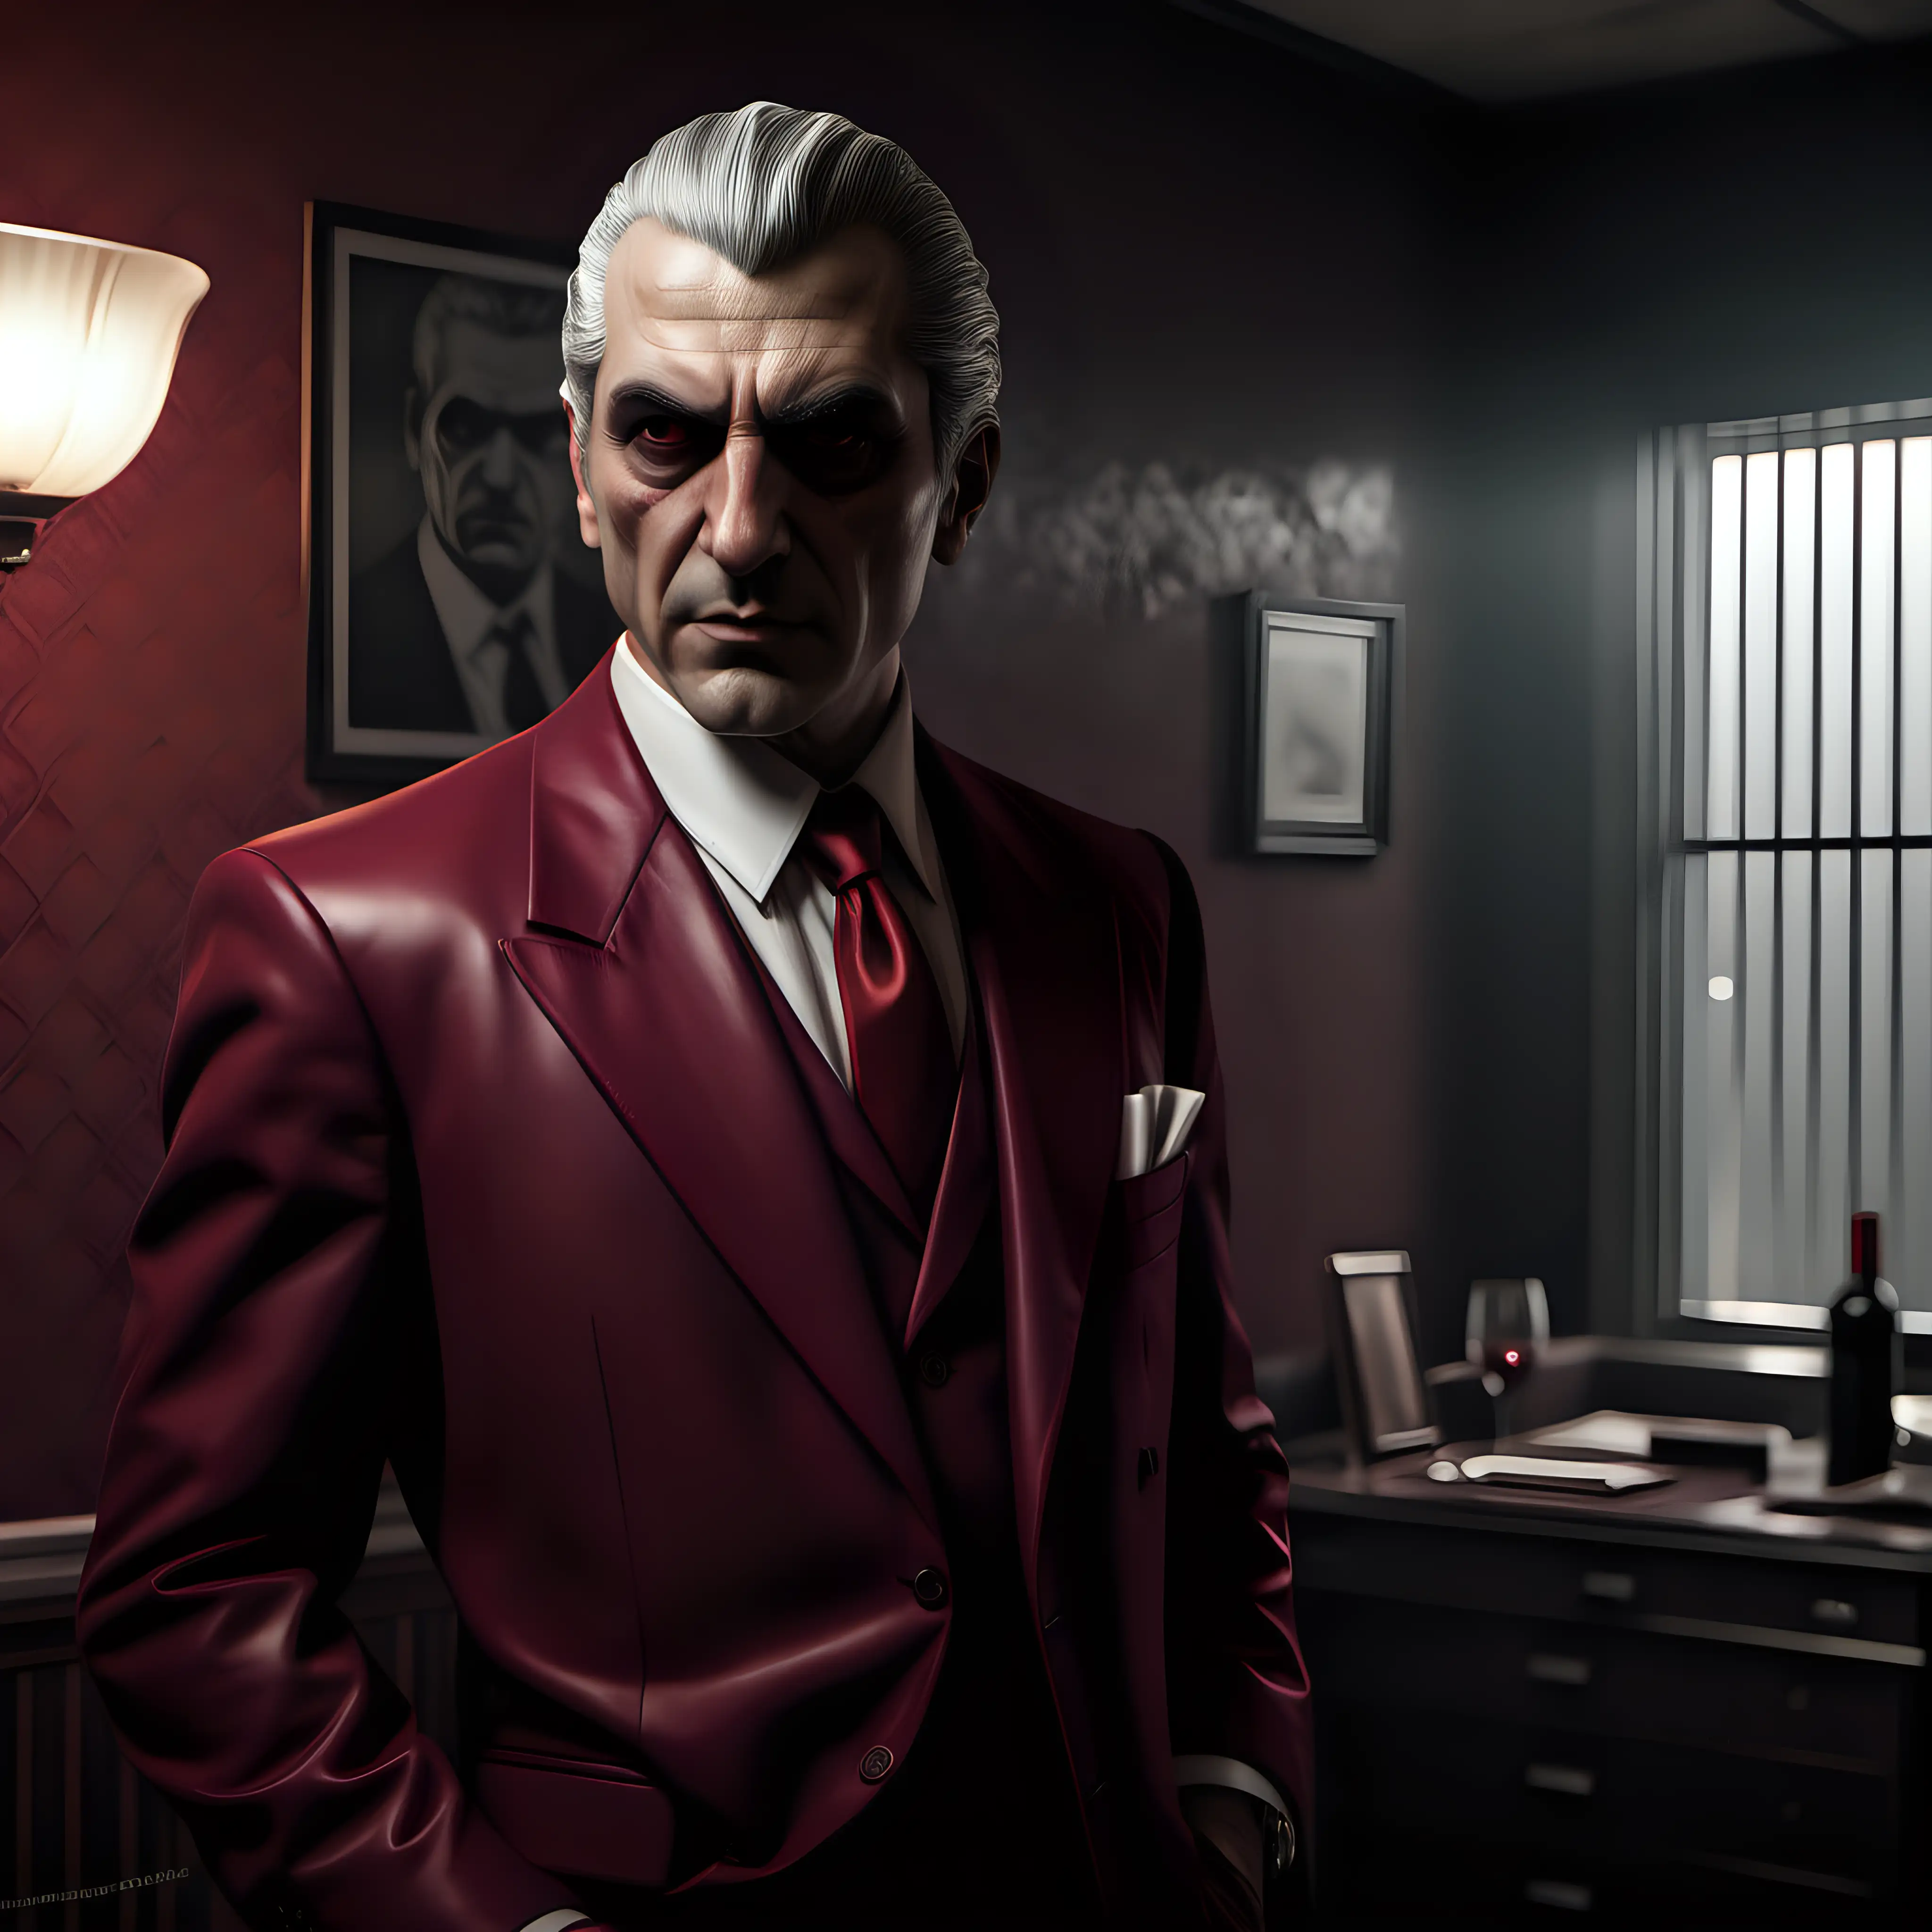 A male Malkavian, grey hair, comb-over, wearing a wine-red suit, white dress shirt, red necktie, inside a mafia boss' room, realistic